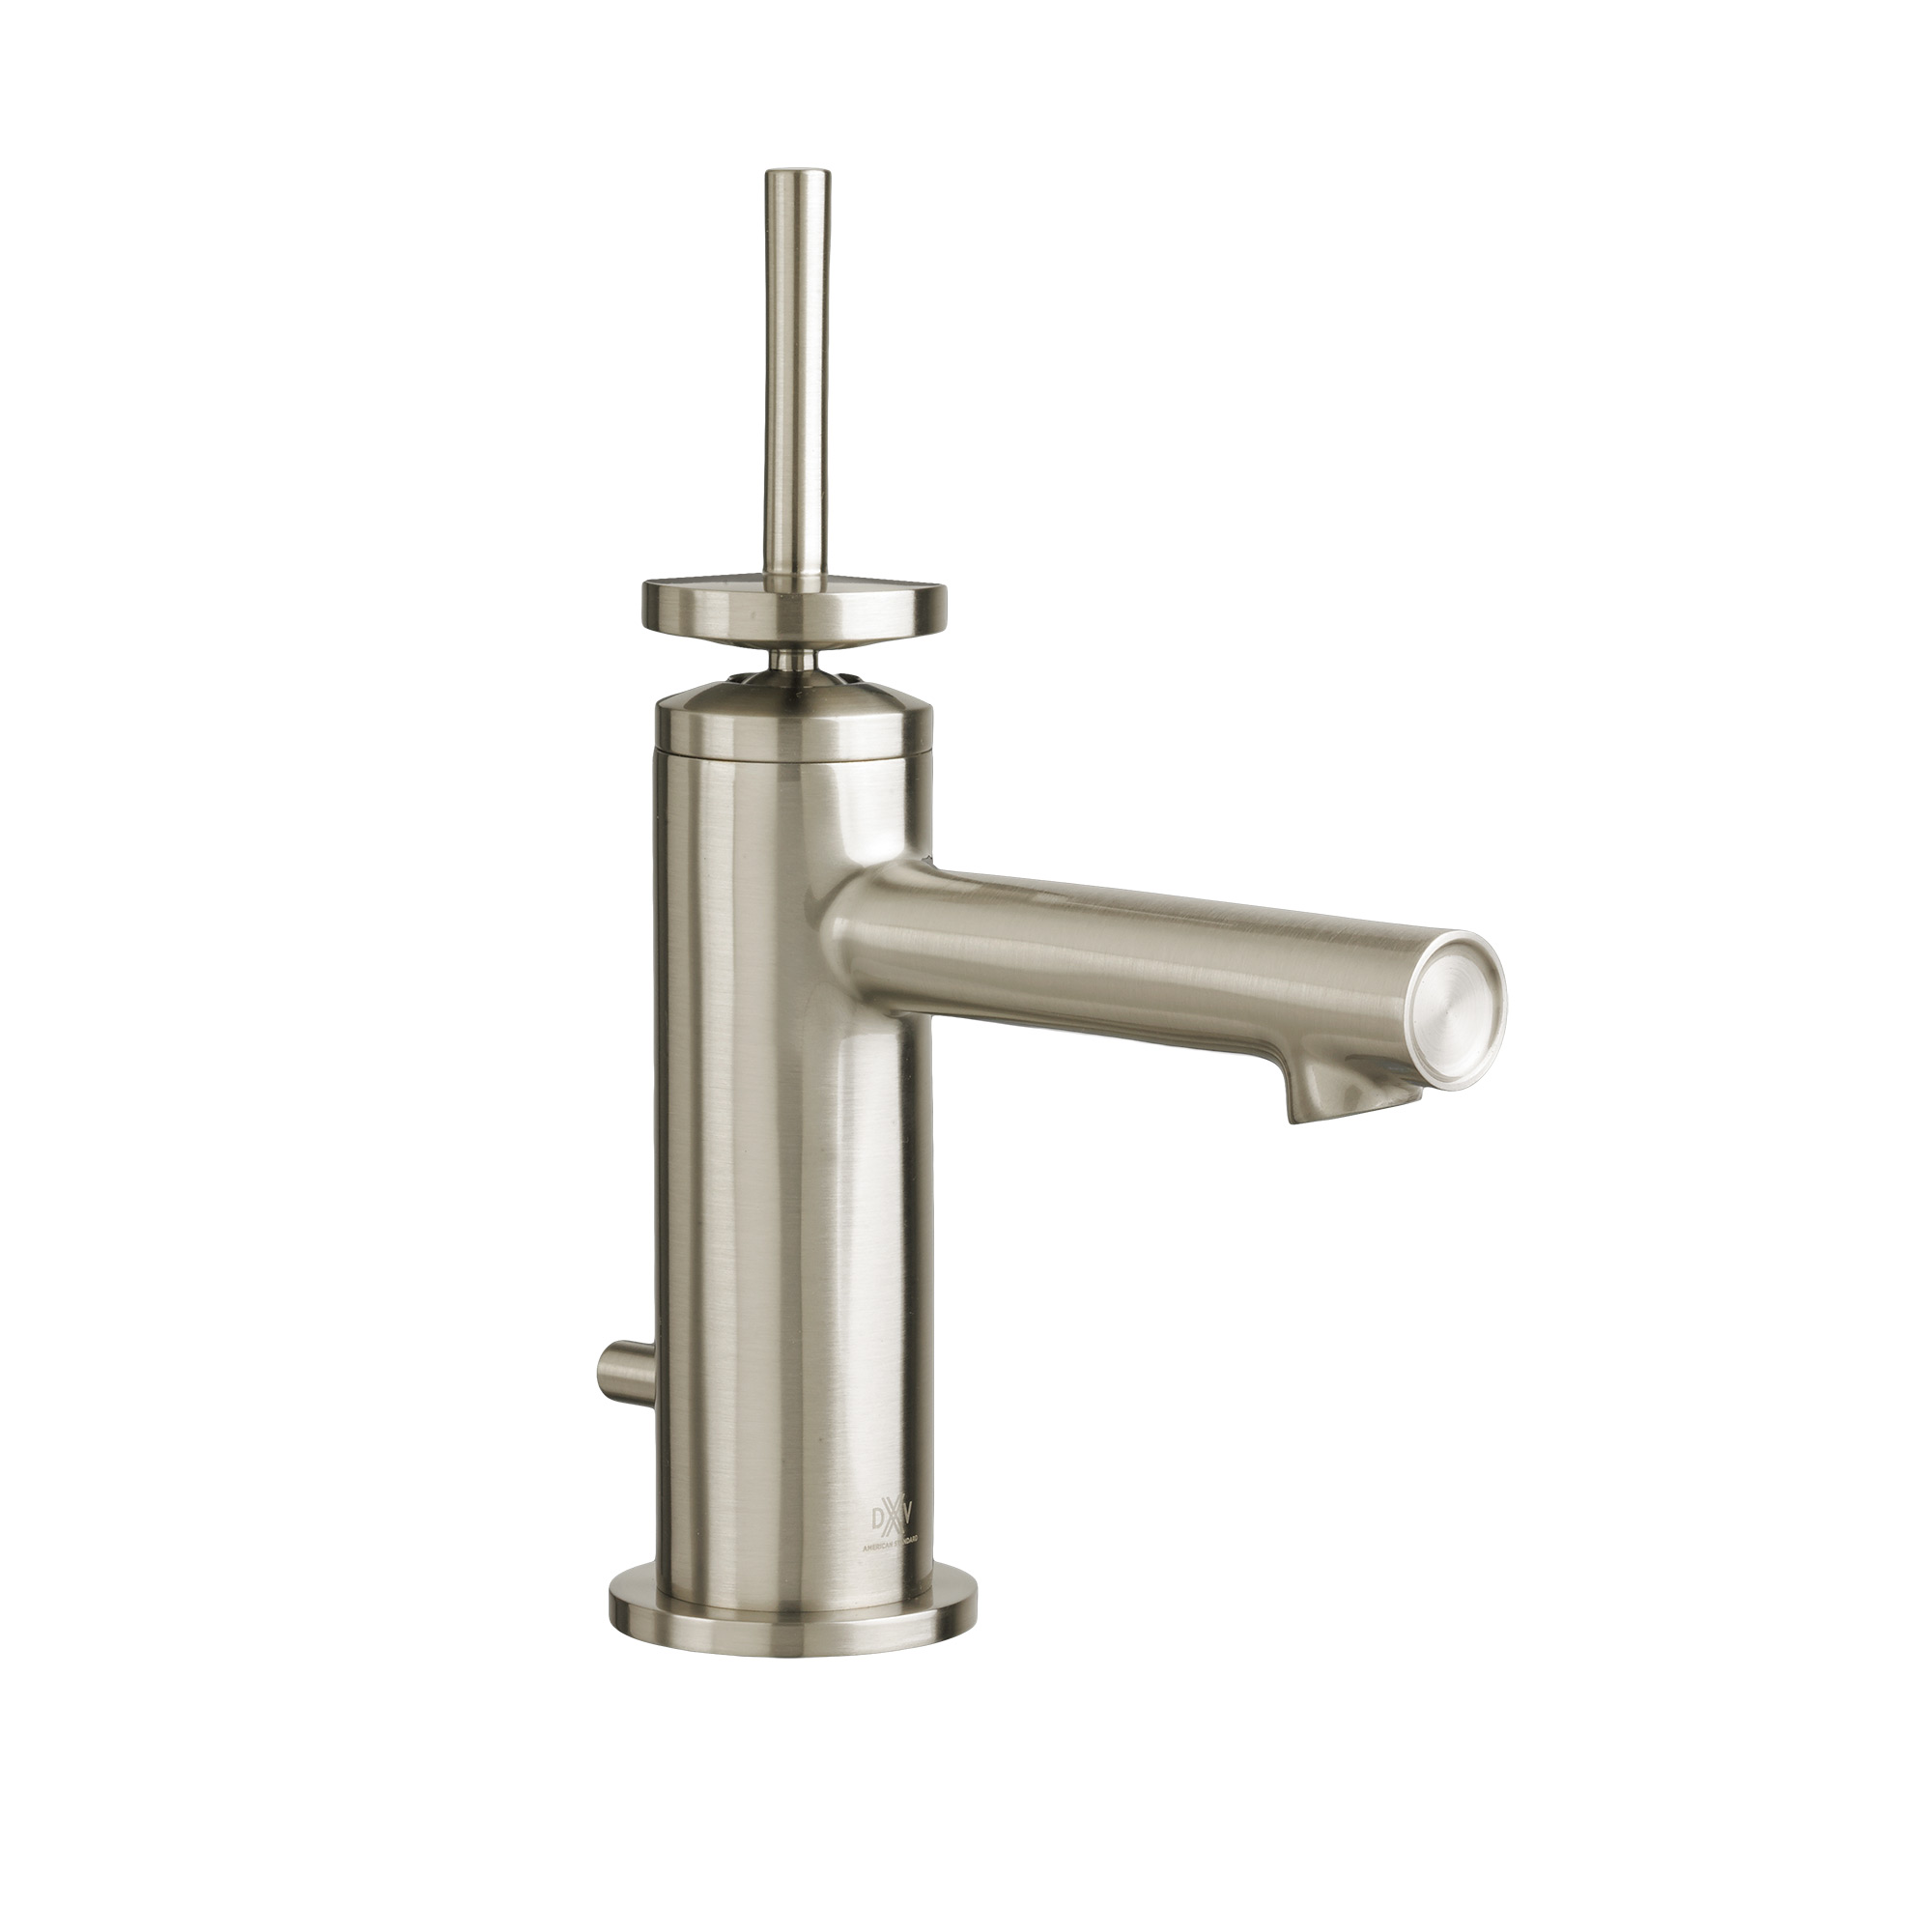 Percy® Single Handle Bathroom Faucet with Stem Handle